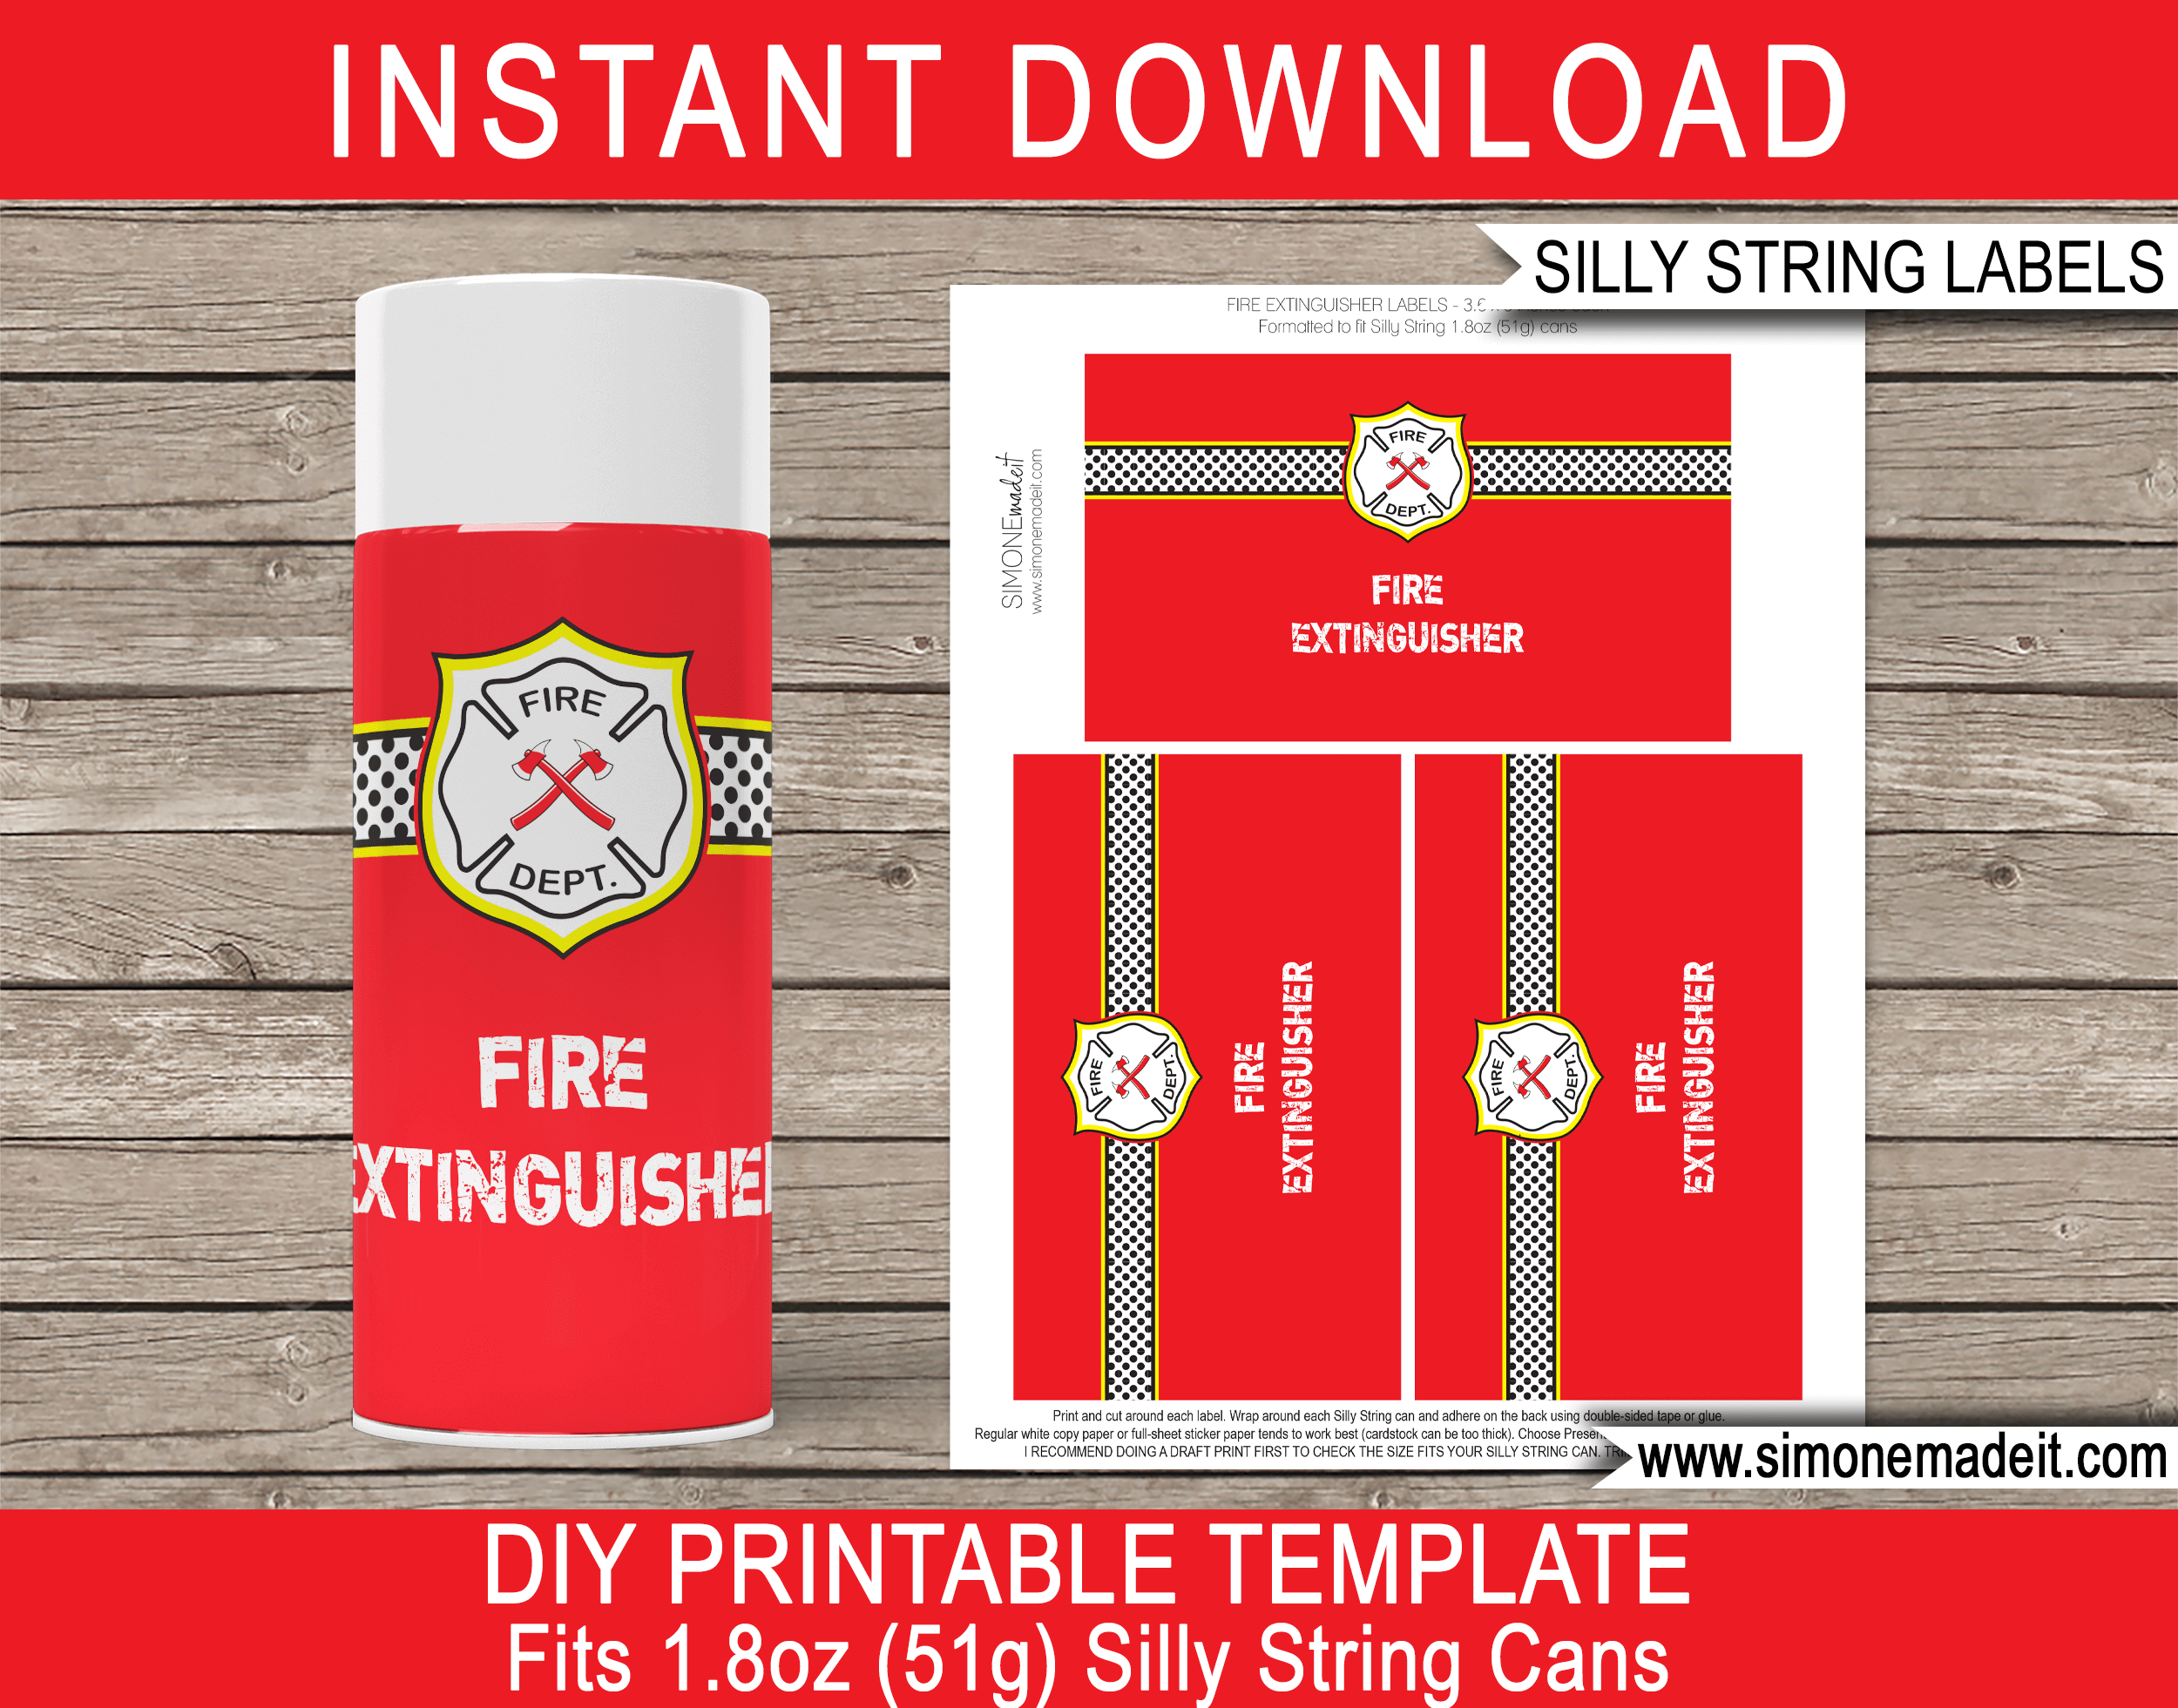 Printable Fire Extinguisher Silly String Labels | Fire Fighter Fireman Birthday Party Games, Activities & Favors | DIY Template | Goofy String | via SIMONEmadeit.com